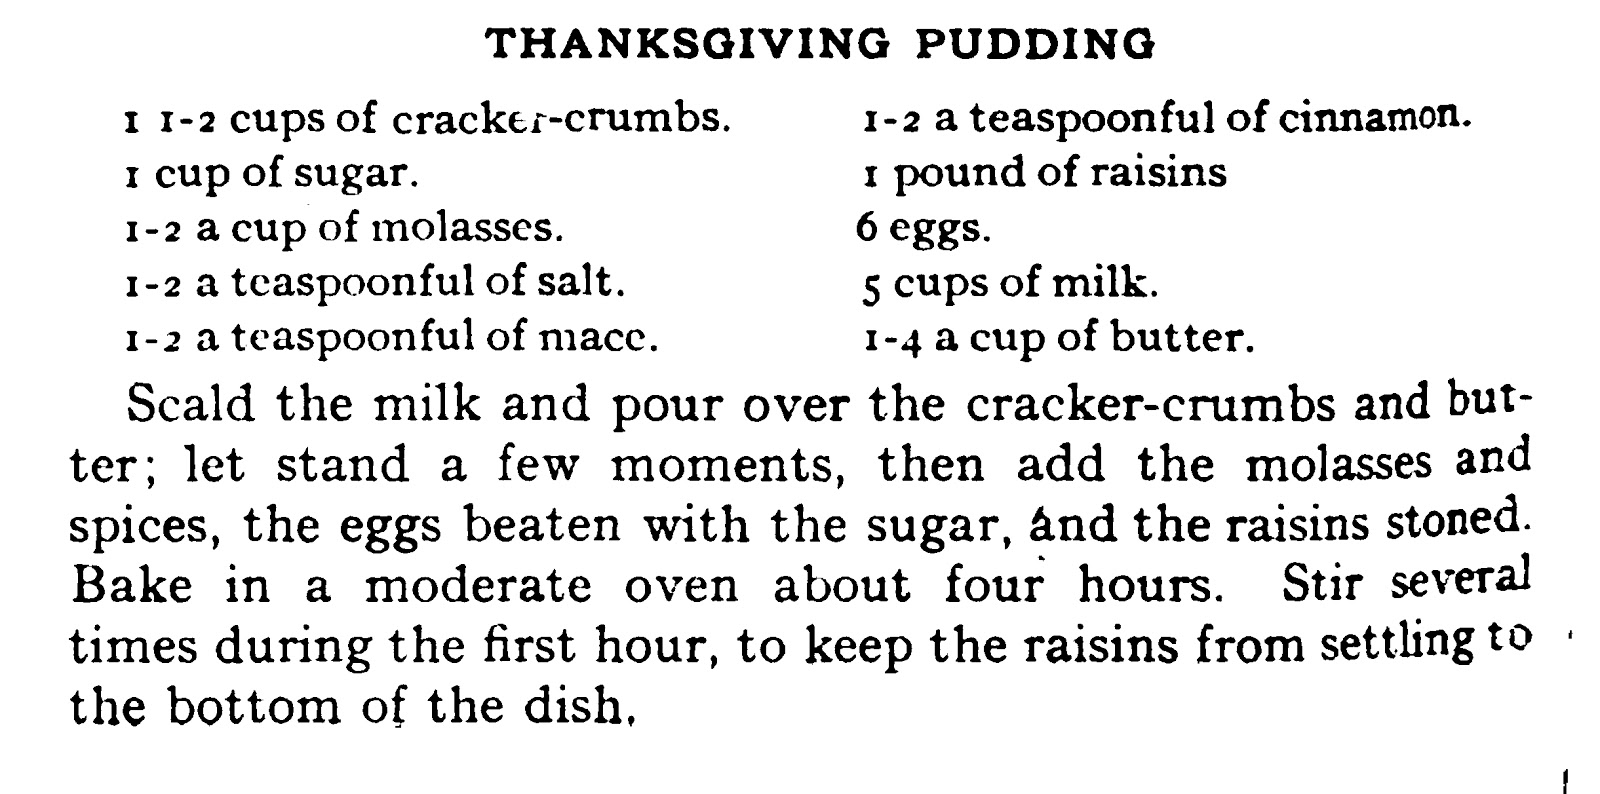 Puddings: Thanksgiving Pudding from 1902